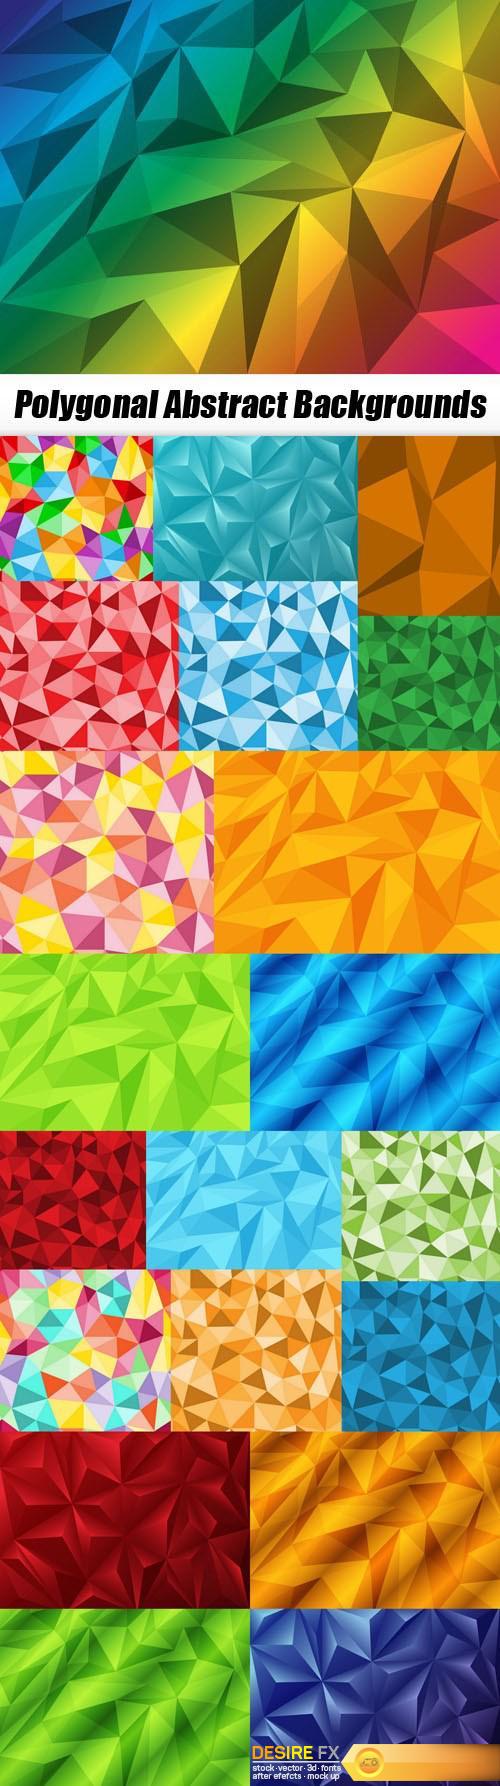 Polygonal Abstract Backgrounds 